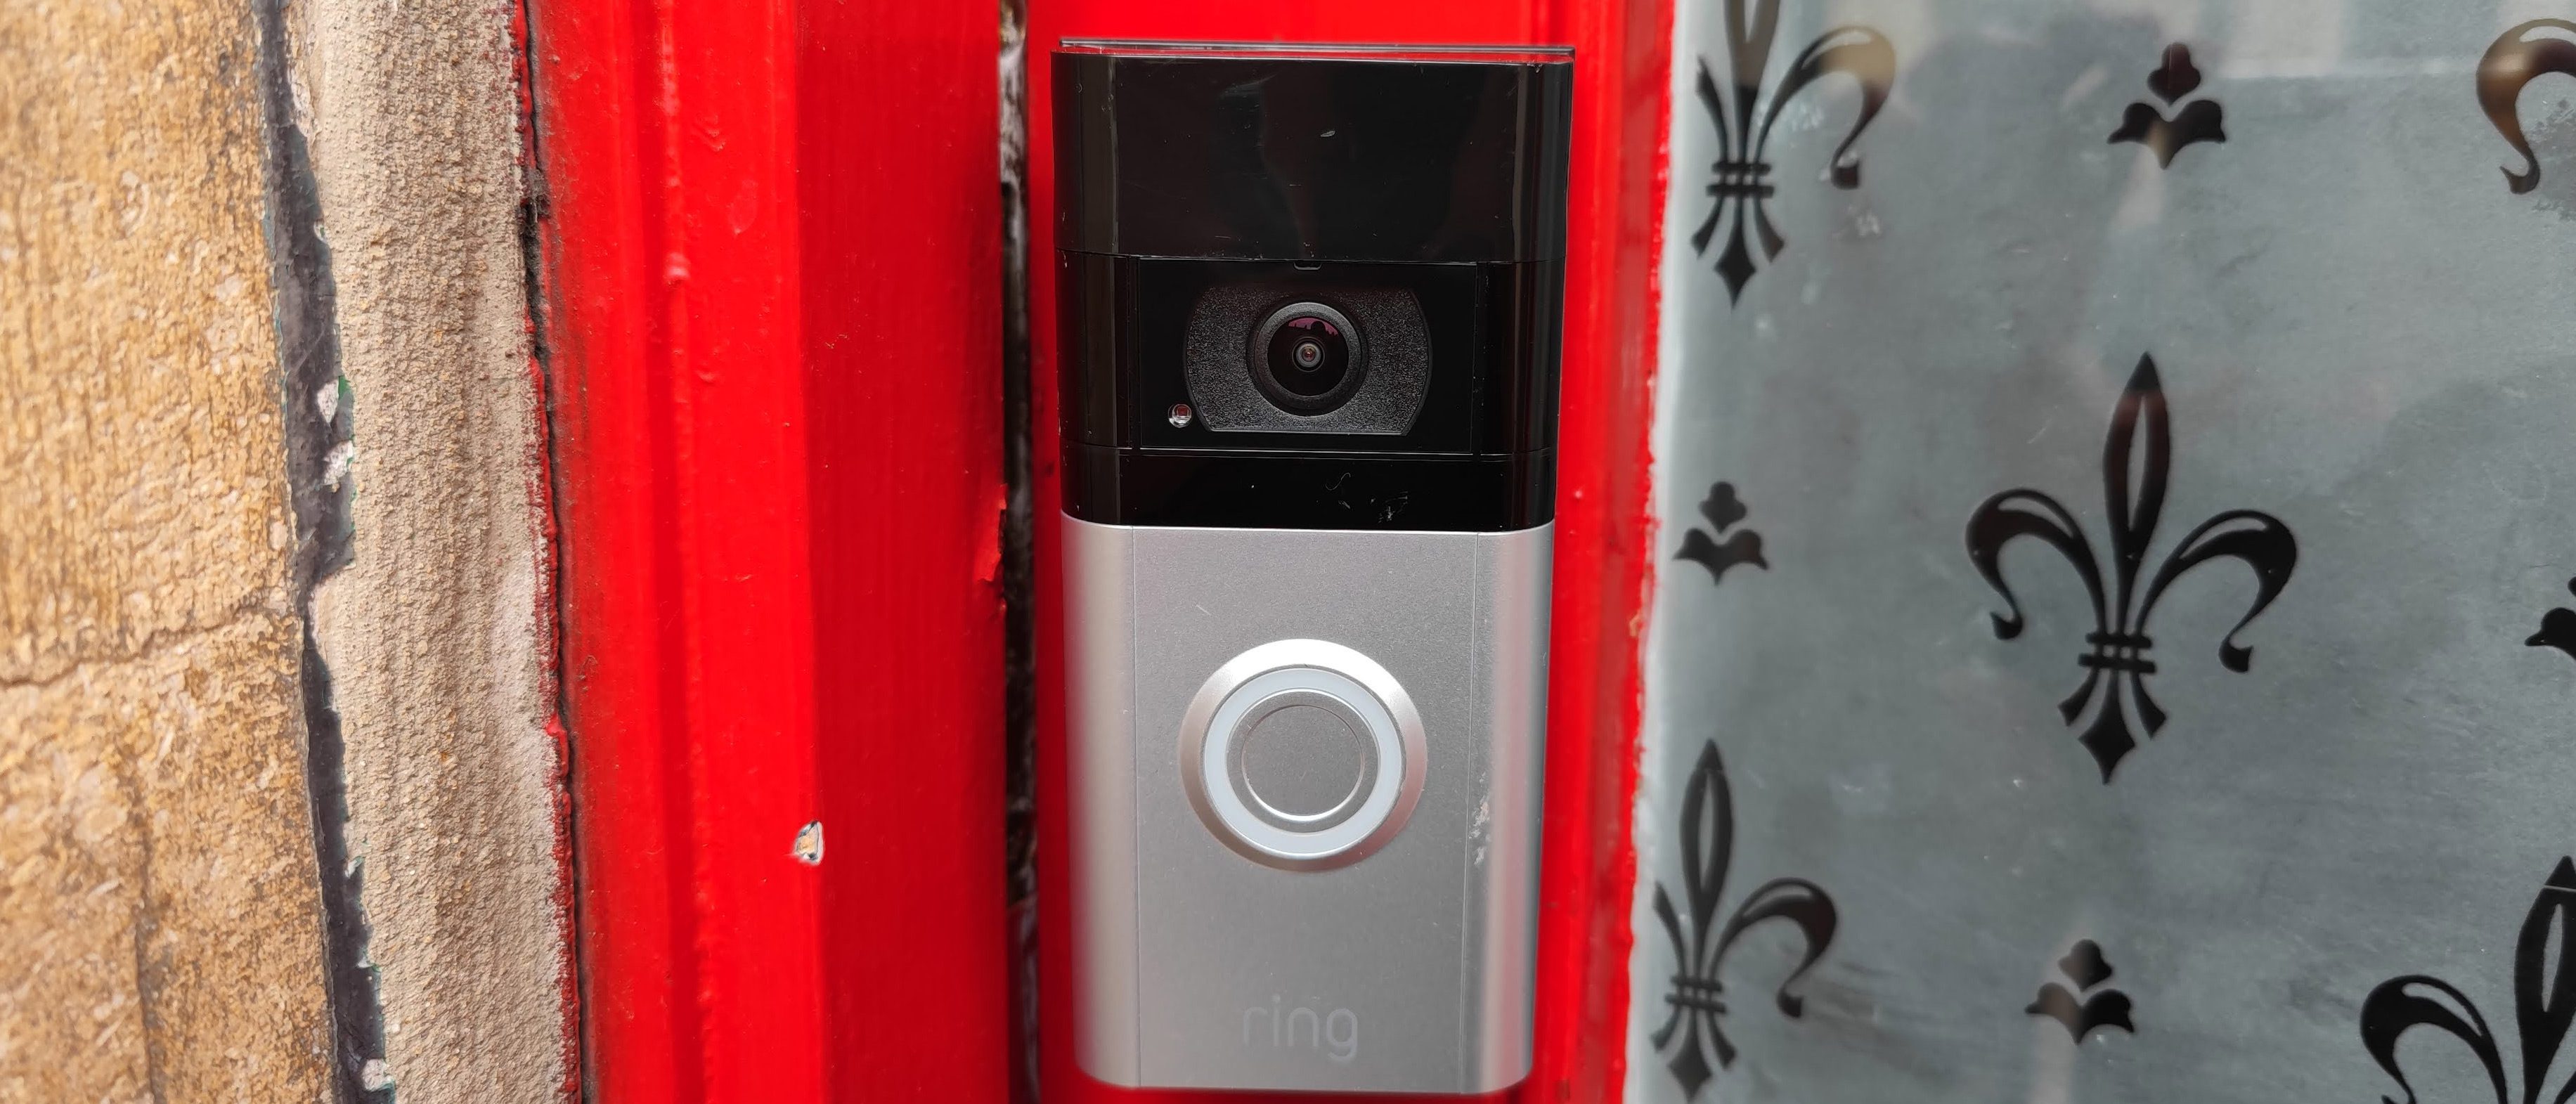 Wiring of Ring Video Doorbell Pro with Existing Chime in UK (Byron 776) -  Video Doorbells - Ring Community